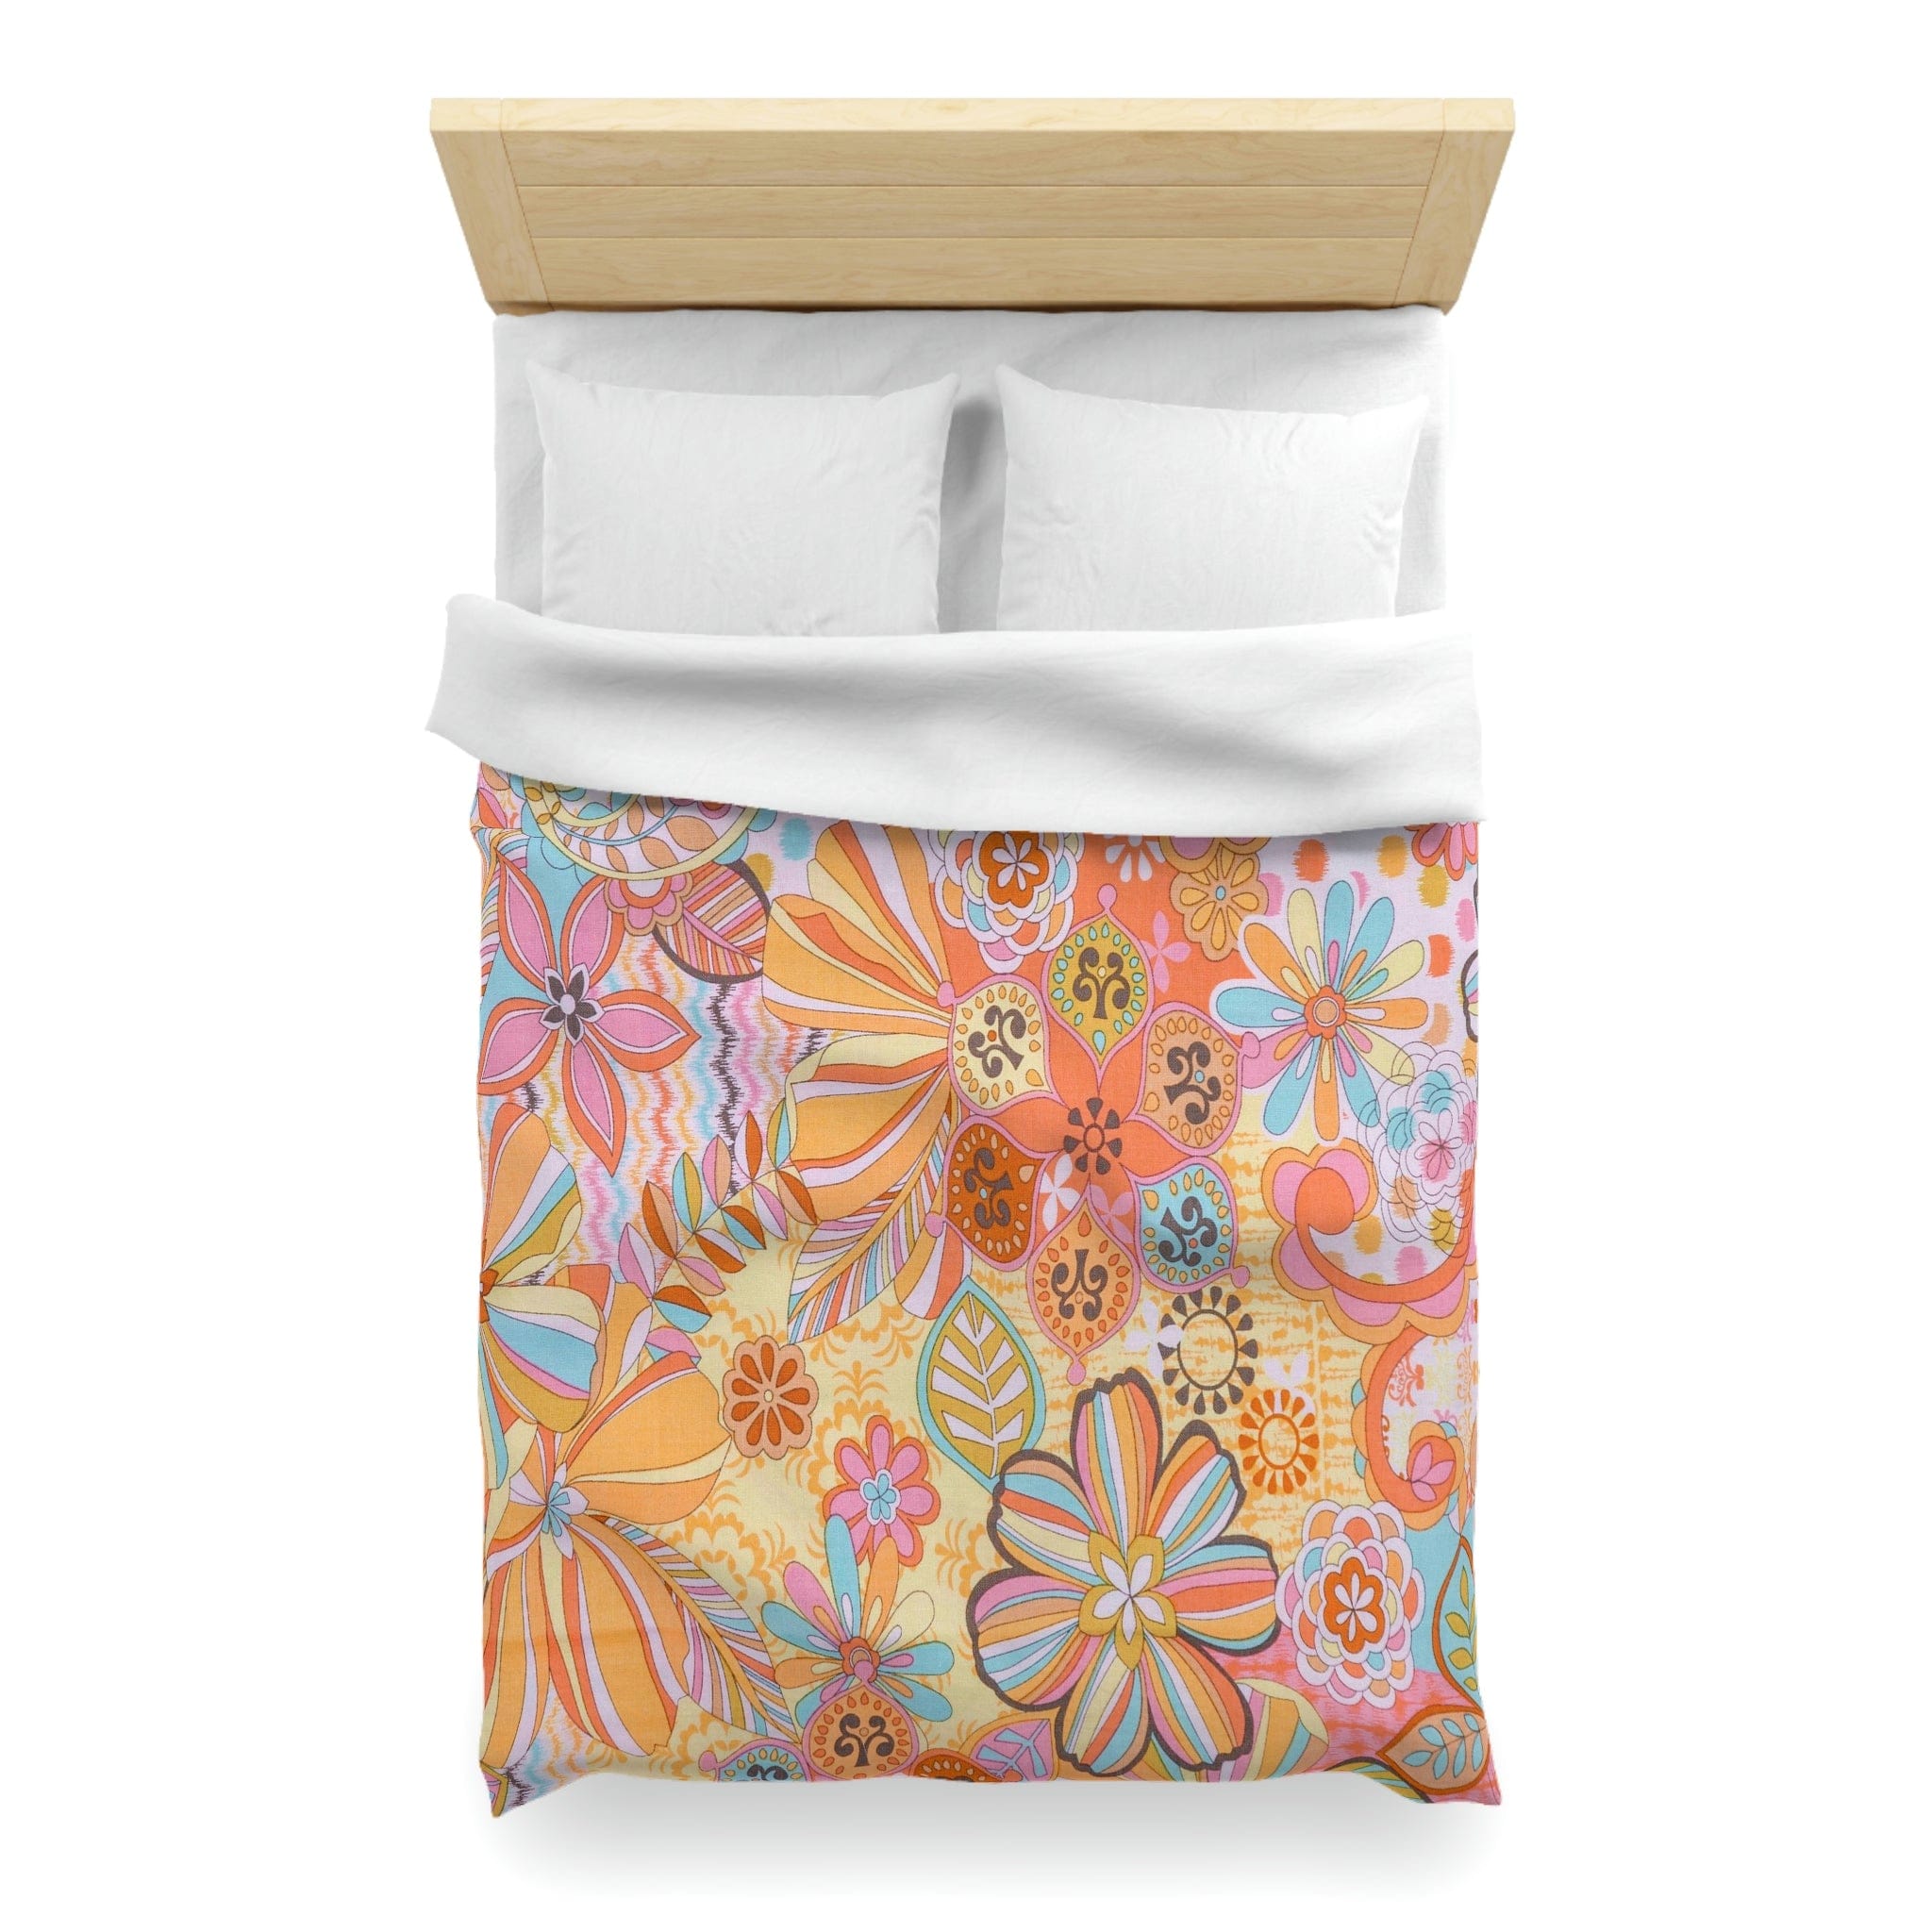 Kate McEnroe New York Retro Trippy Flower Power Duvet Cover, 70s Mid Mod Hippie Chic Floral Bedroom Decor with Groovy Orange, Yellow, and Blue PaletteDuvet Covers26323424880278798214